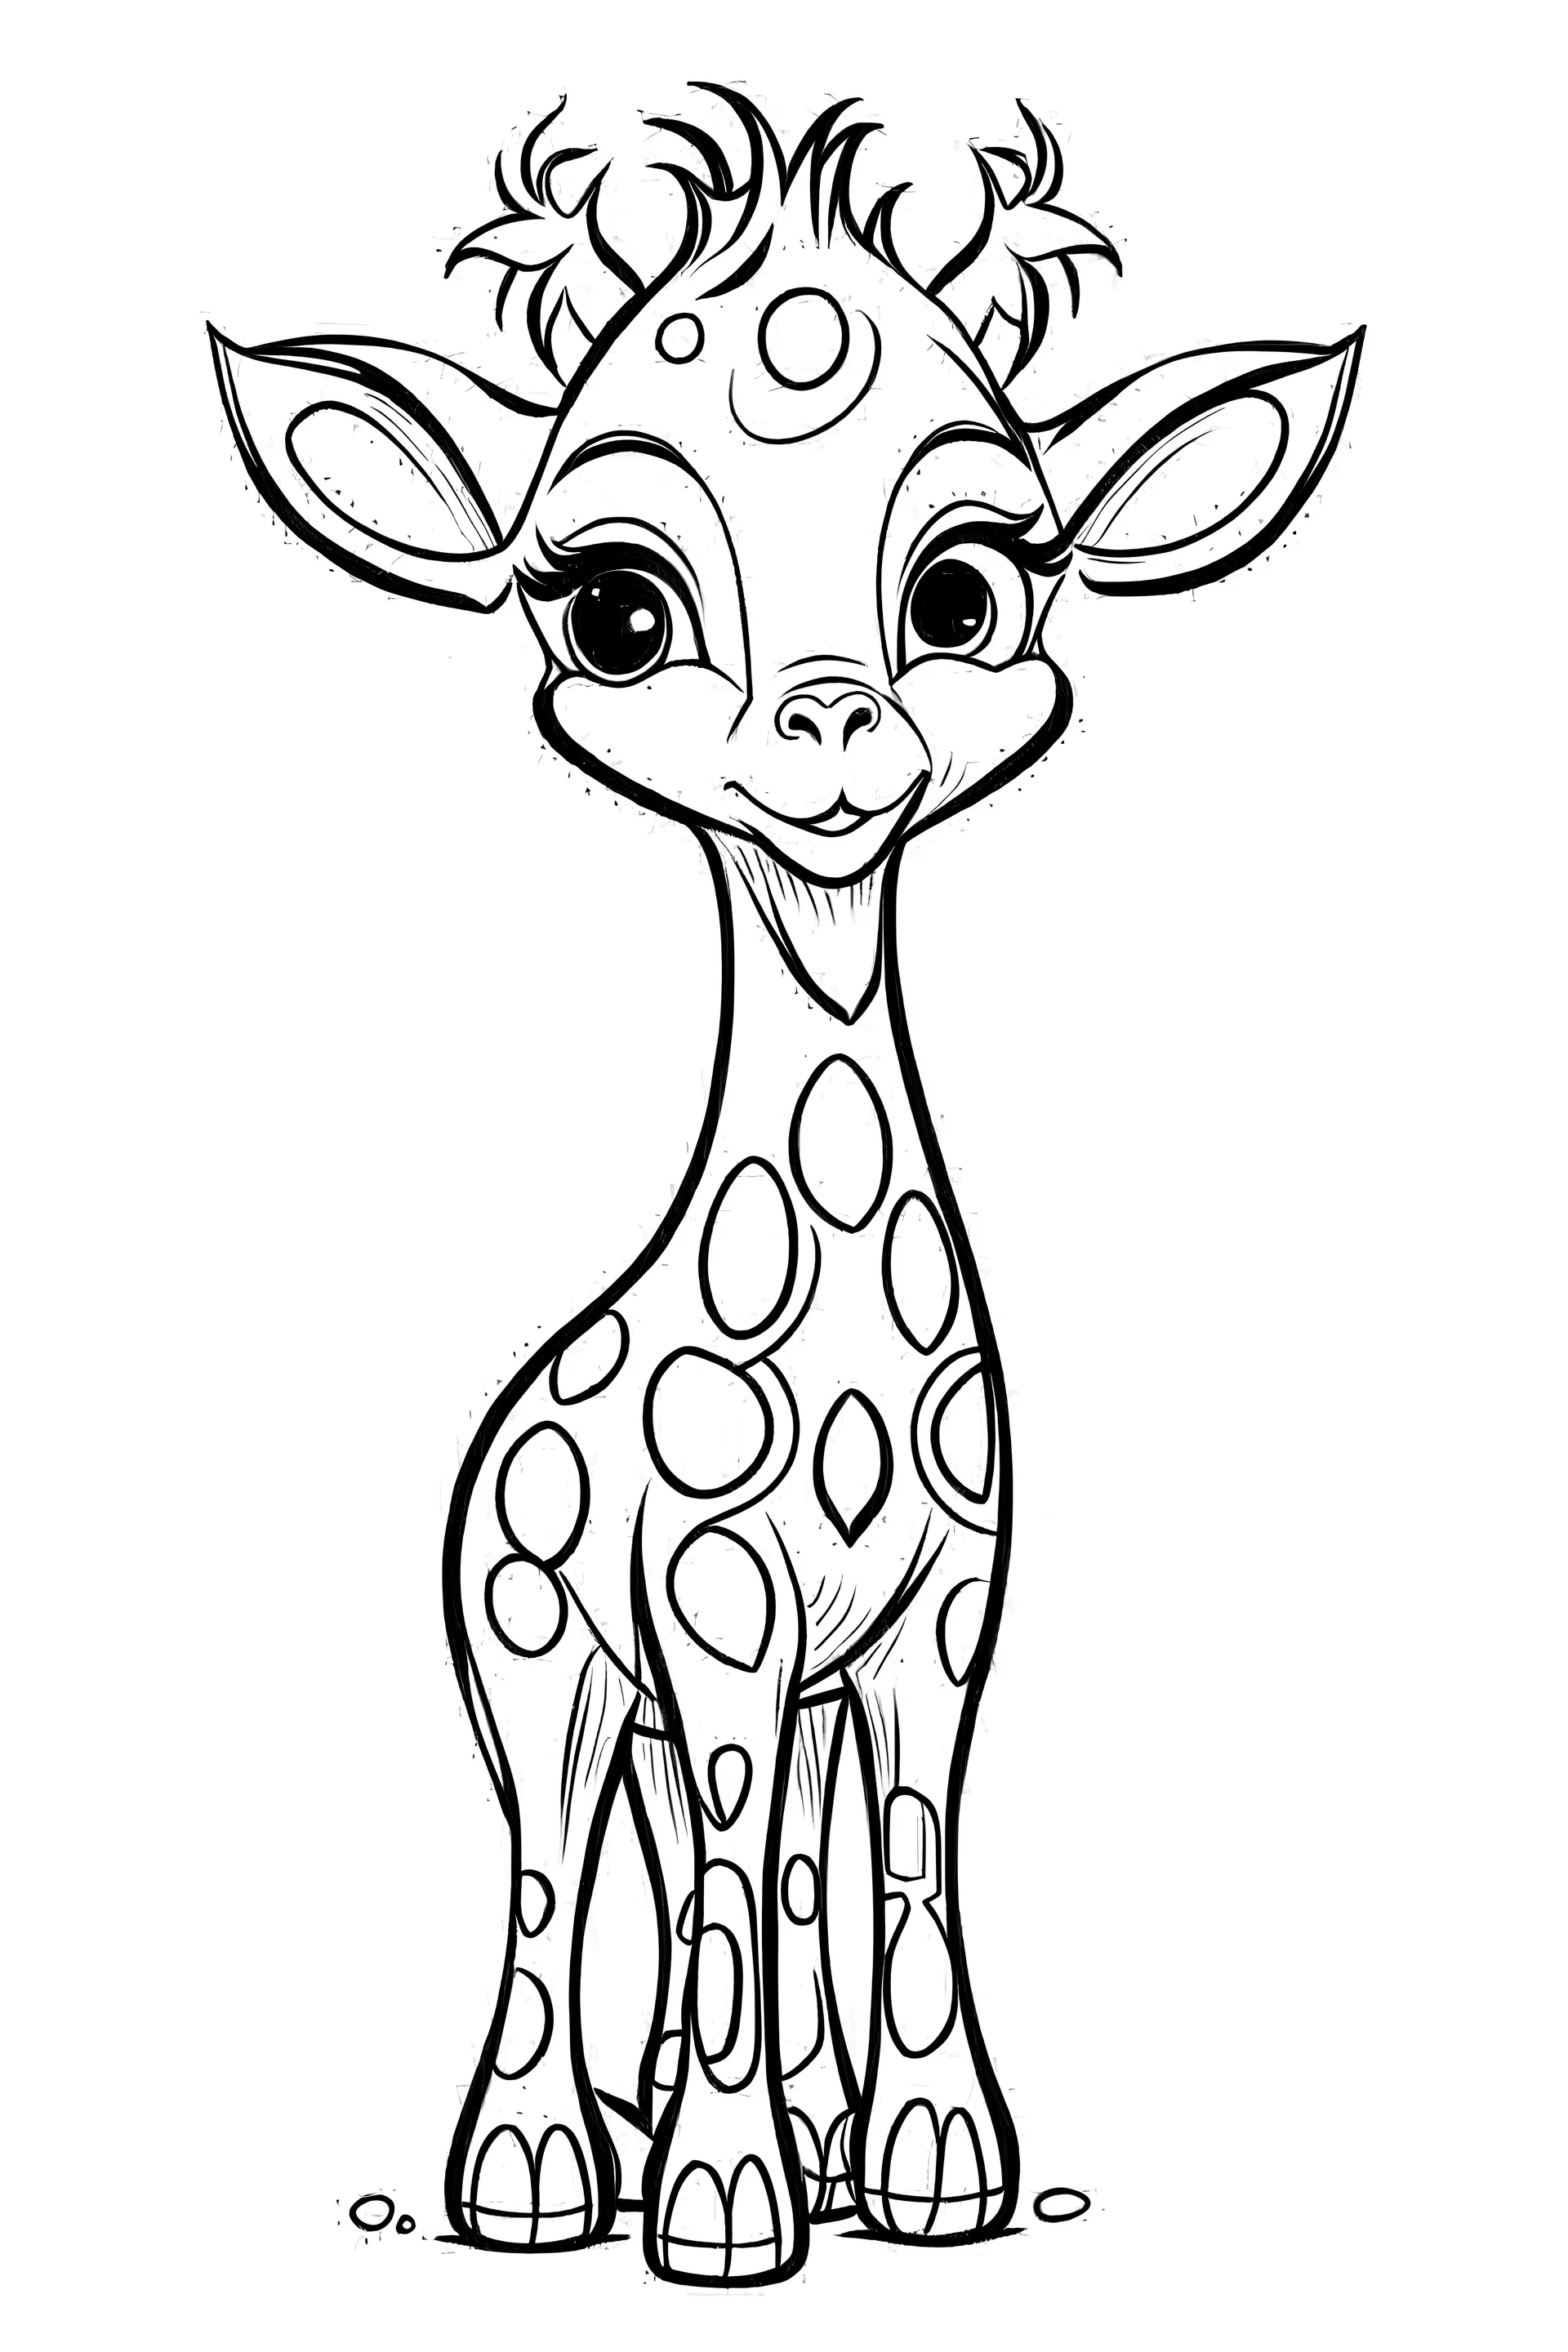 21 Easy Drawings of Giraffes for Kids - Cool Kids Crafts